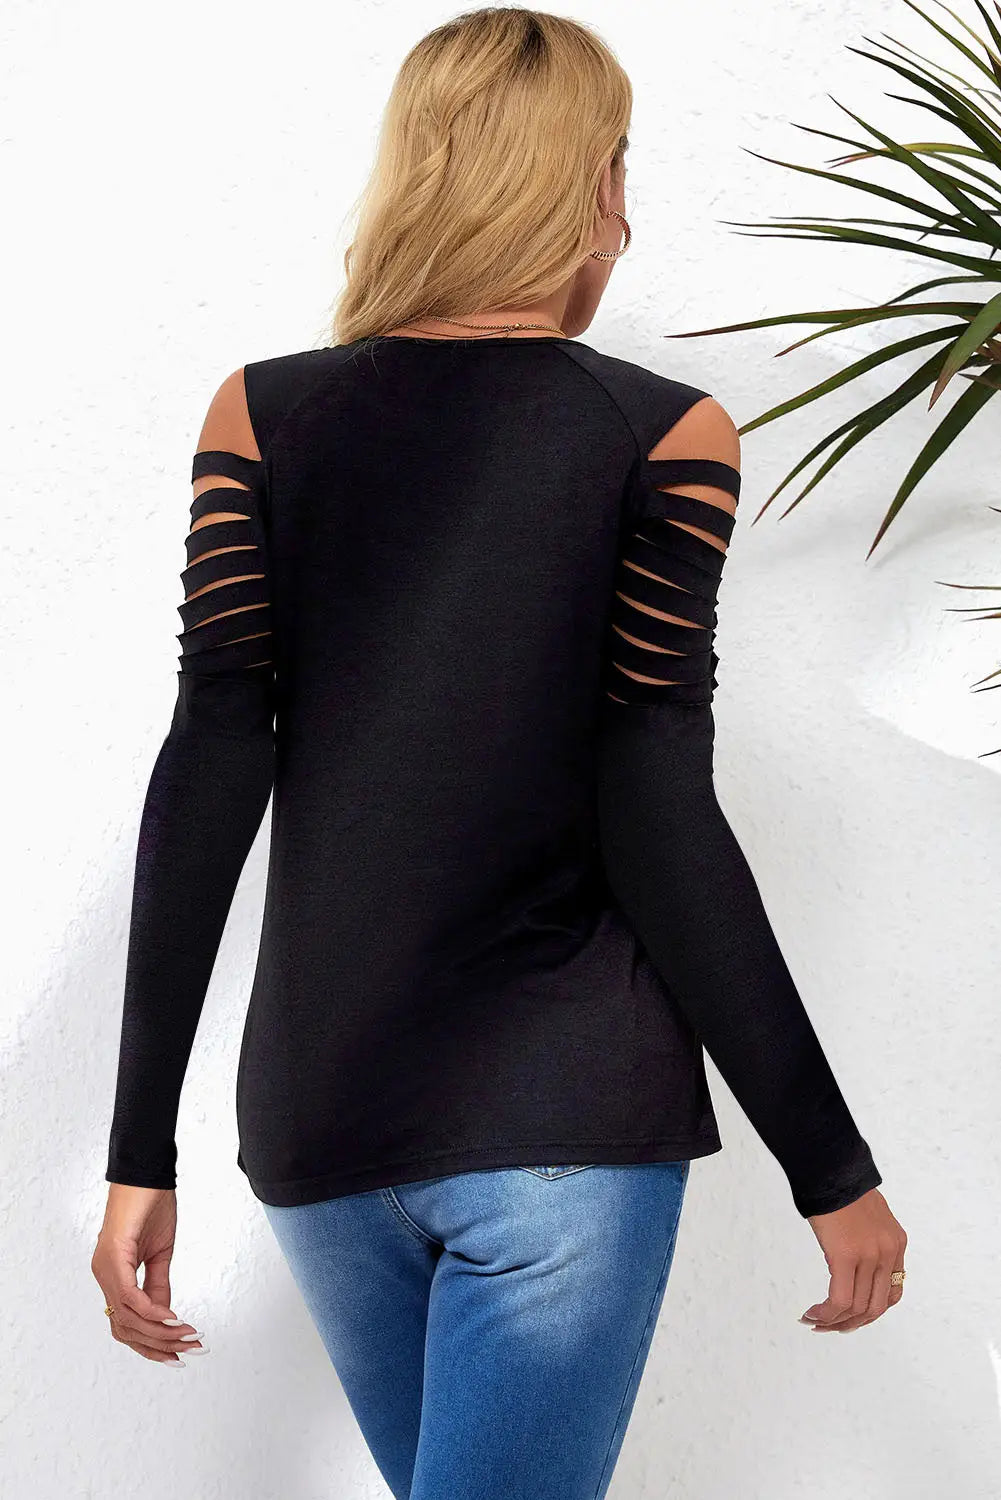 Black mesh patch ripped long sleeve top - tops